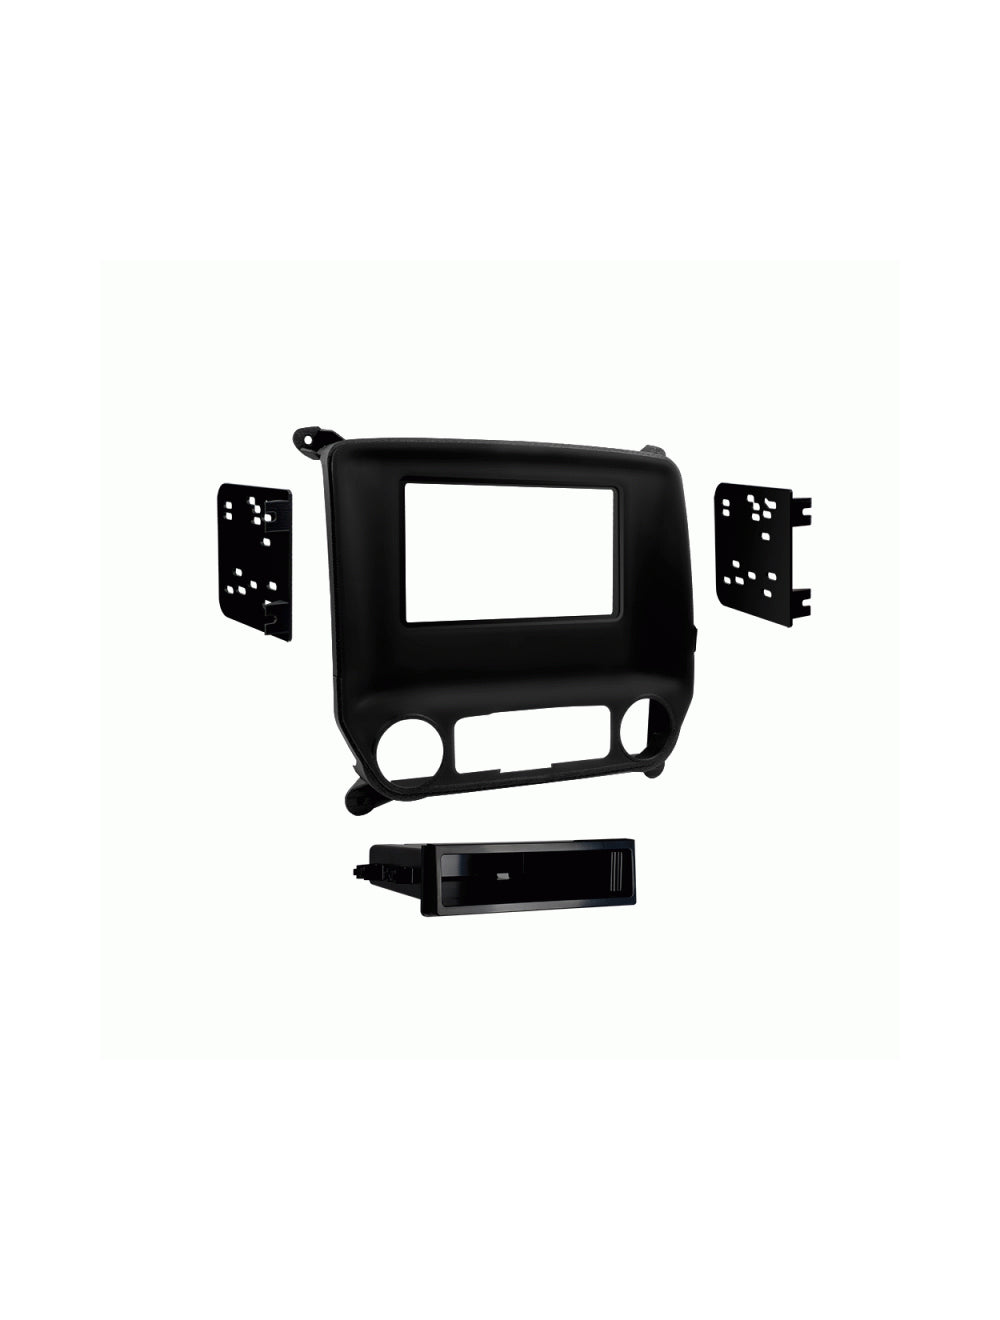 Metra 99-3014G Single DIN/Double DIN Dash Kit for 2014-Up Chevy Silverado and Sierra Black